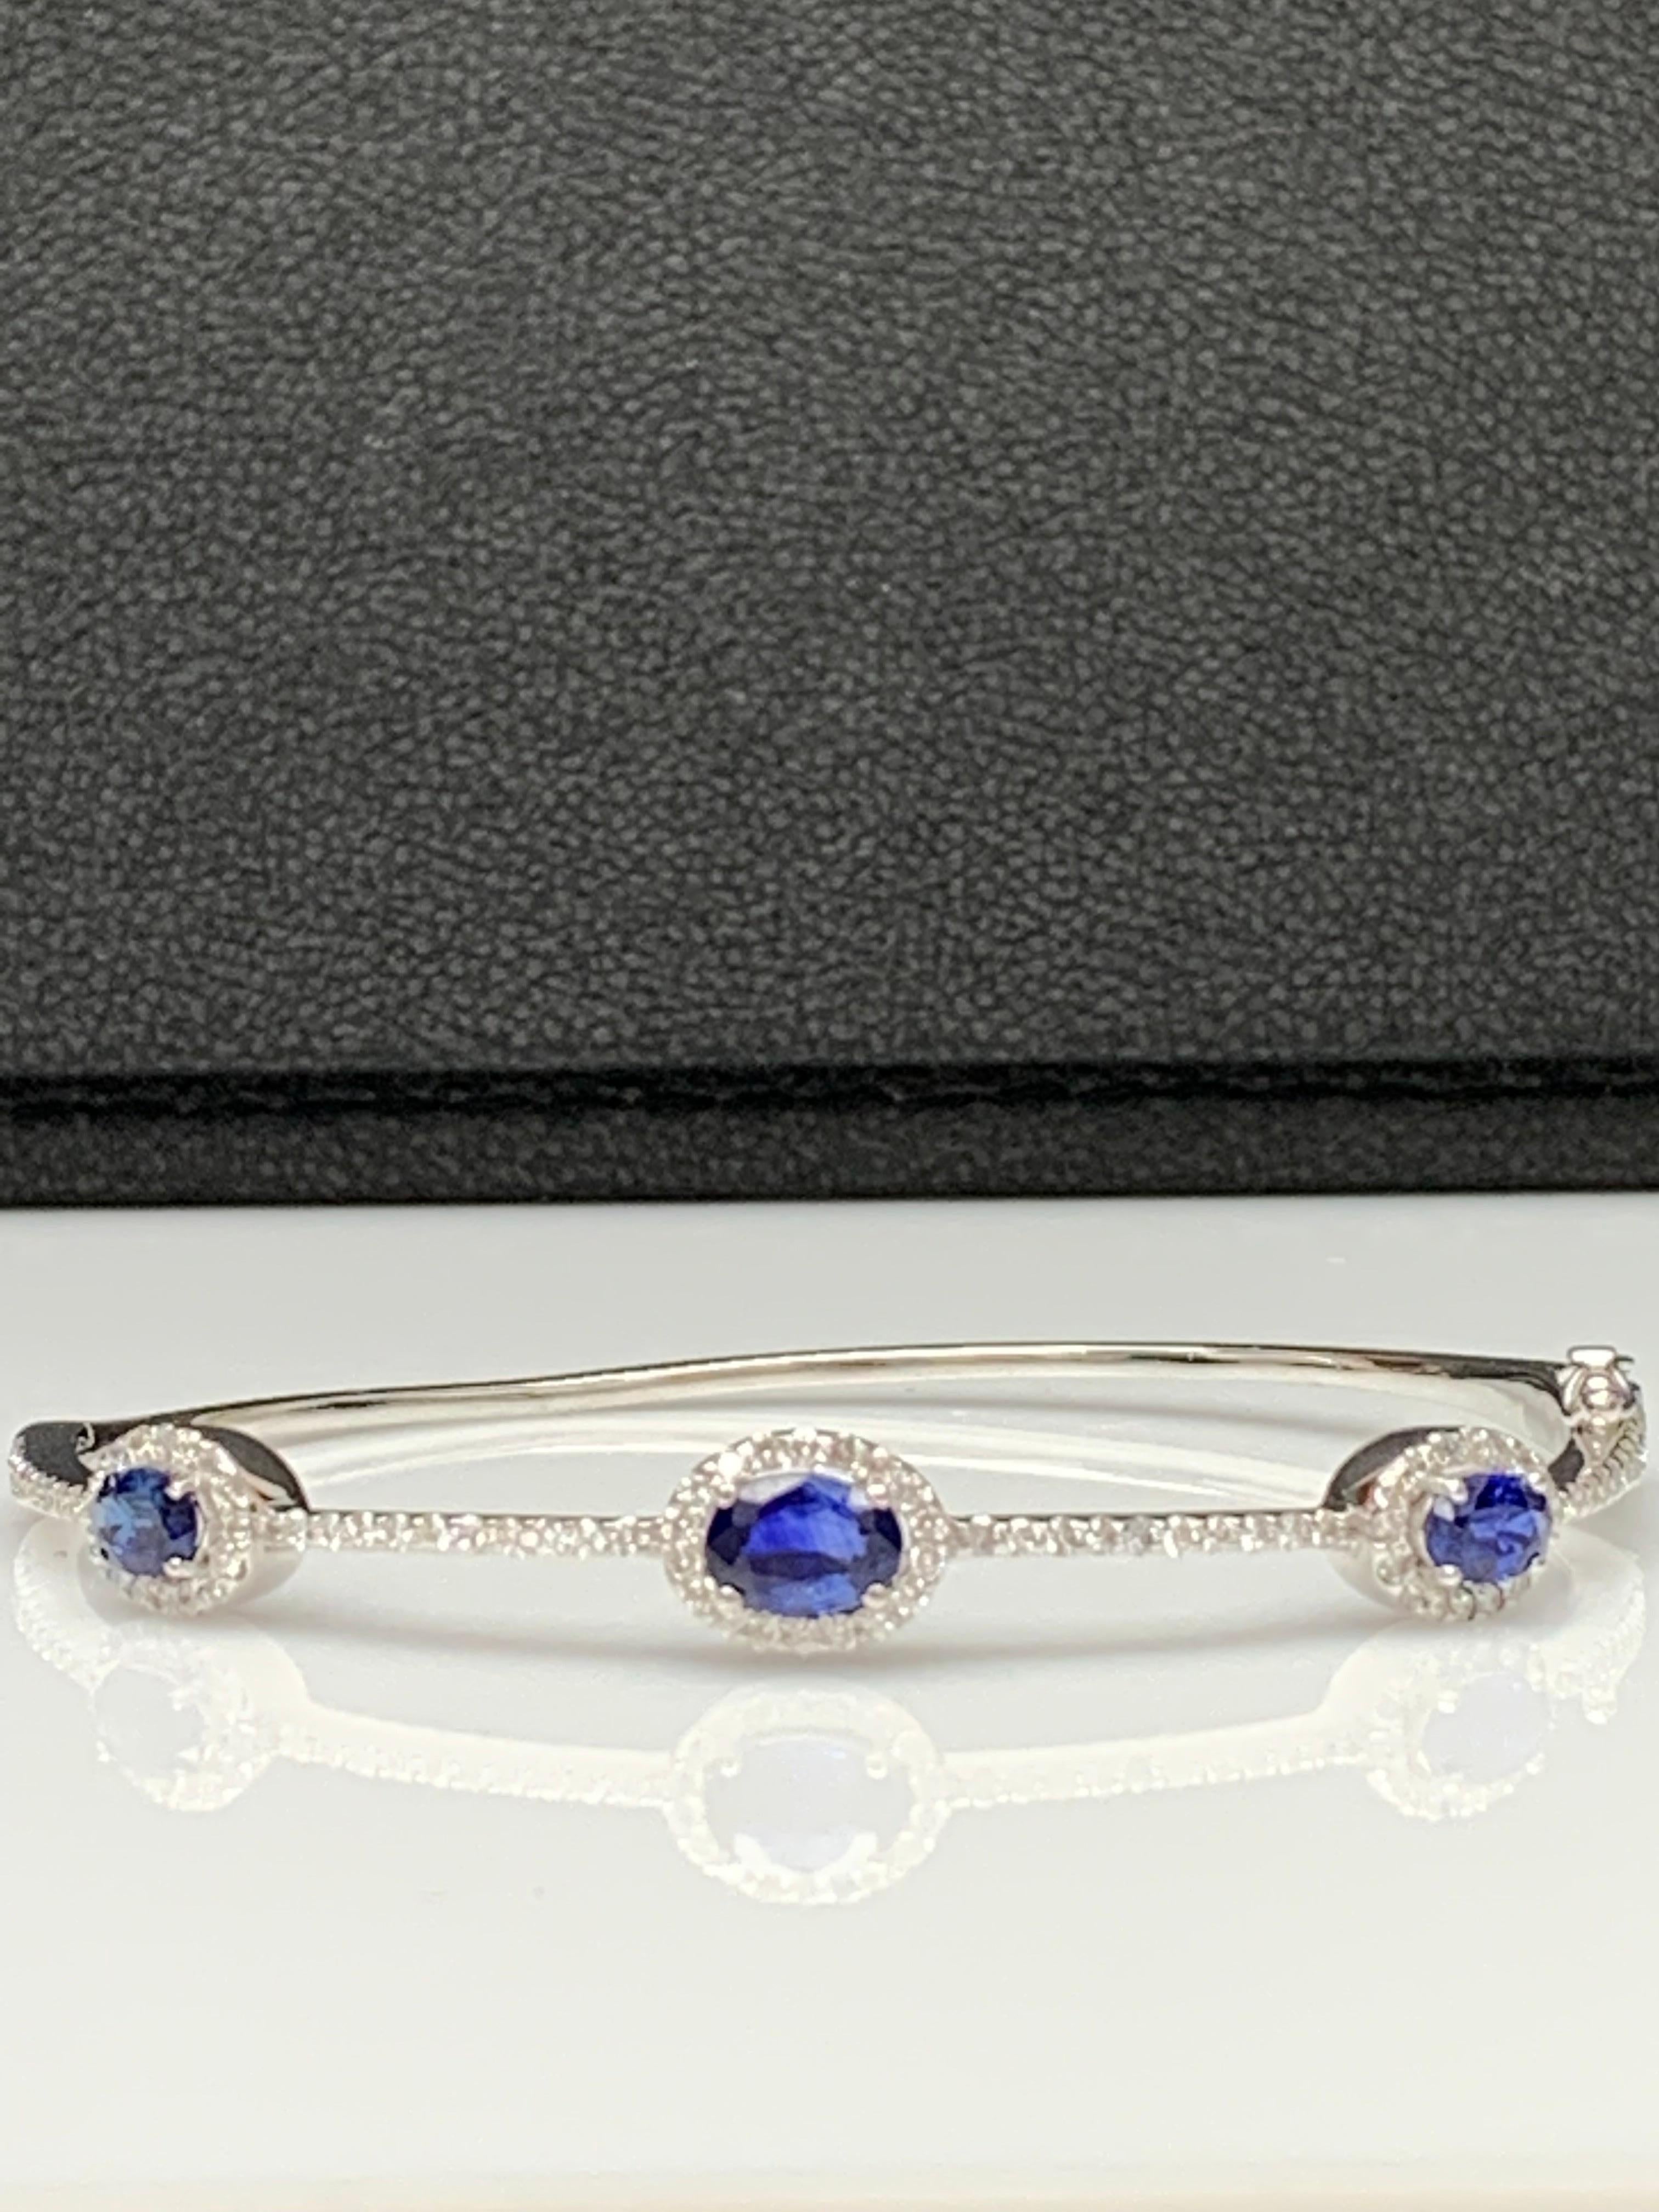 1.80 Carat Oval Cut Sapphire and Diamond Bangle Bracelet in 14K White Gold For Sale 1